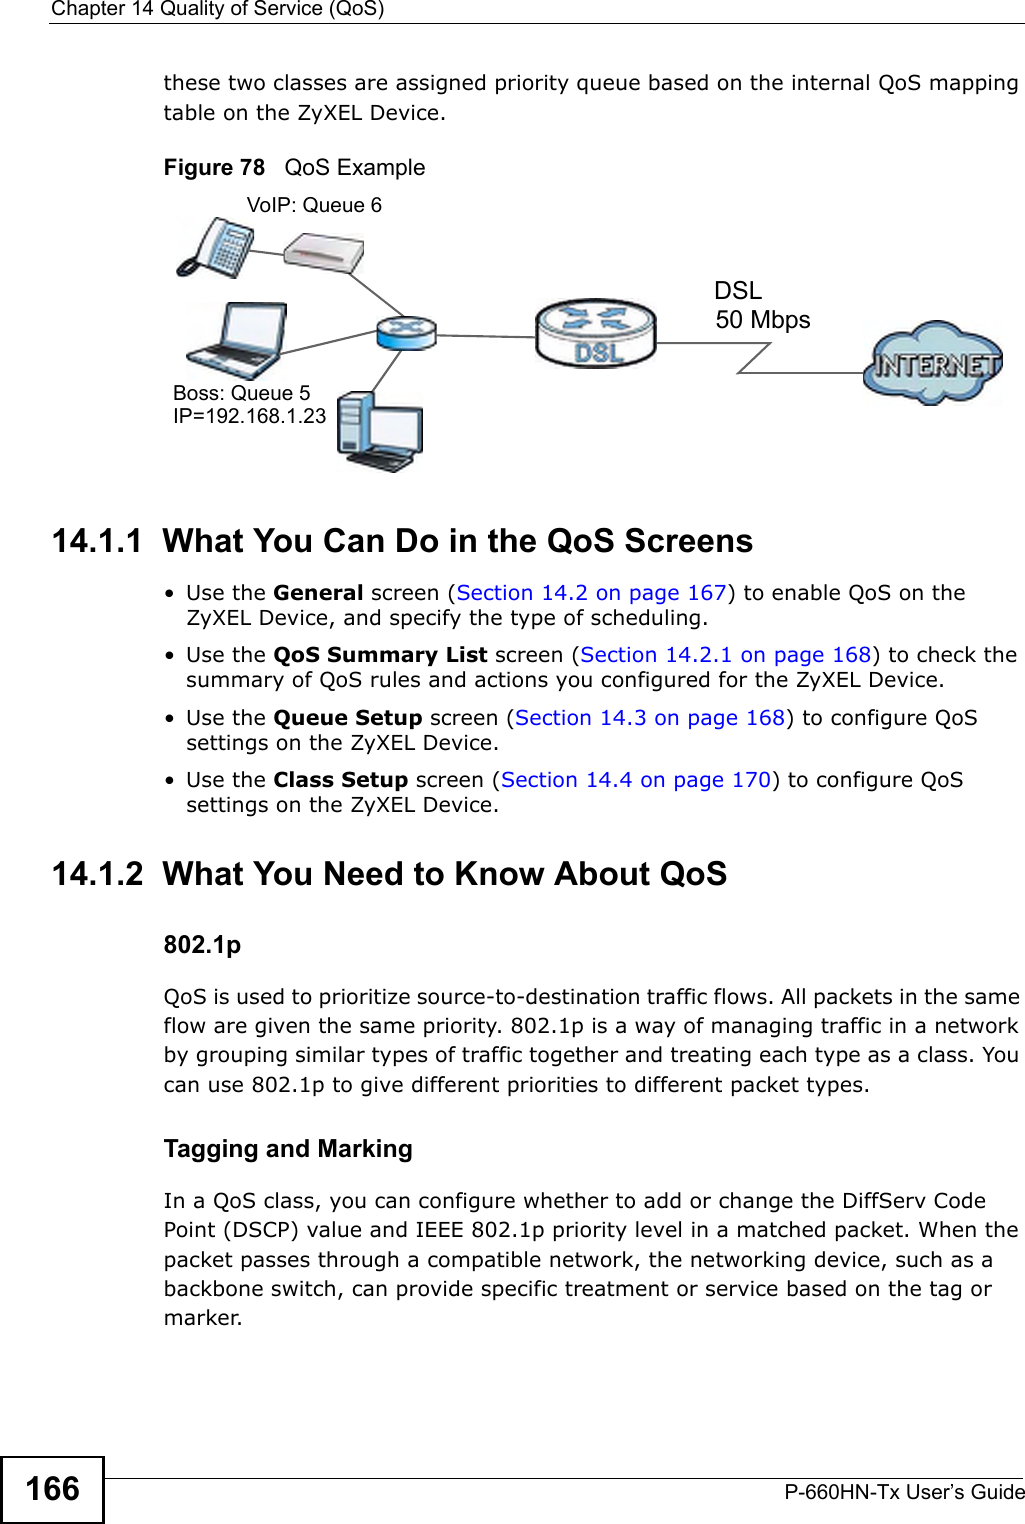 Chapter 14 Quality of Service (QoS)P-660HN-Tx User’s Guide166these two classes are assigned priority queue based on the internal QoS mapping table on the ZyXEL Device.Figure 78   QoS Example14.1.1  What You Can Do in the QoS Screens•Use the General screen (Section 14.2 on page 167) to enable QoS on the ZyXEL Device, and specify the type of scheduling.•Use the QoS Summary List screen (Section 14.2.1 on page 168) to check the summary of QoS rules and actions you configured for the ZyXEL Device.•Use the Queue Setup screen (Section 14.3 on page 168) to configure QoS settings on the ZyXEL Device.•Use the Class Setup screen (Section 14.4 on page 170) to configure QoS settings on the ZyXEL Device.14.1.2  What You Need to Know About QoS802.1pQoS is used to prioritize source-to-destination traffic flows. All packets in the same flow are given the same priority. 802.1p is a way of managing traffic in a network by grouping similar types of traffic together and treating each type as a class. You can use 802.1p to give different priorities to different packet types. Tagging and MarkingIn a QoS class, you can configure whether to add or change the DiffServ Code Point (DSCP) value and IEEE 802.1p priority level in a matched packet. When the packet passes through a compatible network, the networking device, such as a backbone switch, can provide specific treatment or service based on the tag or marker.50 MbpsDSLVoIP: Queue 6Boss: Queue 5IP=192.168.1.23